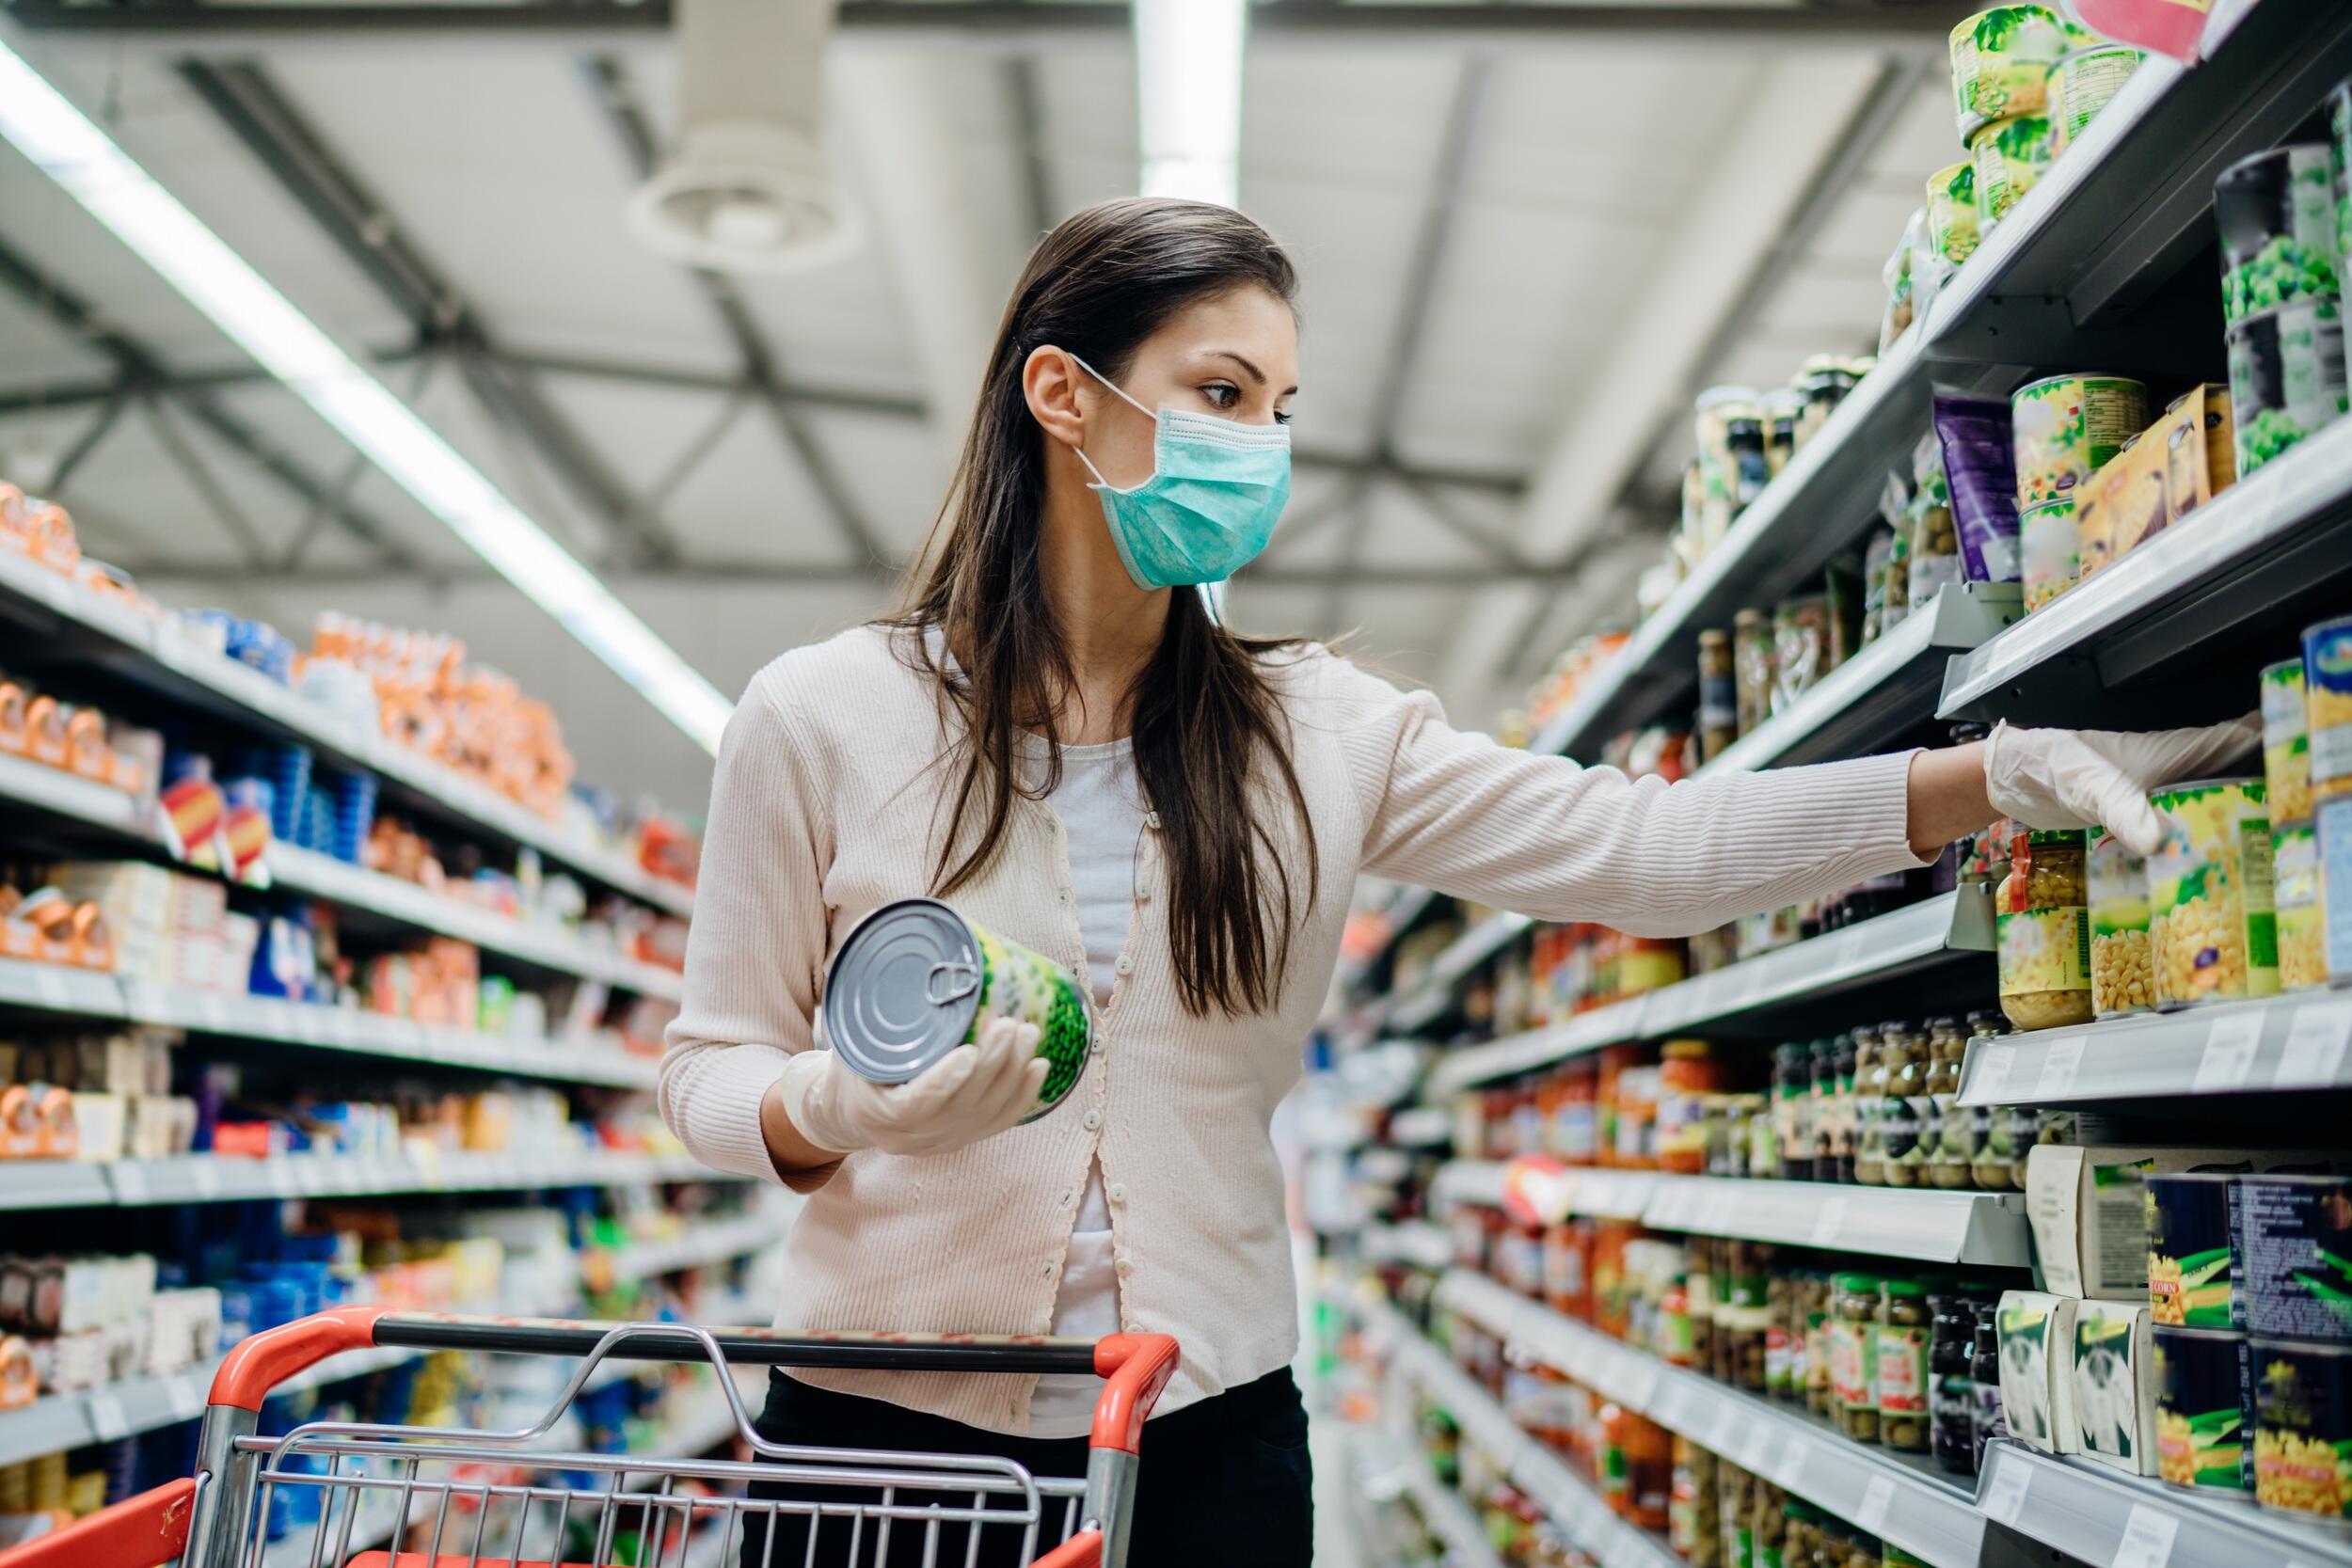 A person wearing a mask while shopping at a grocery store.